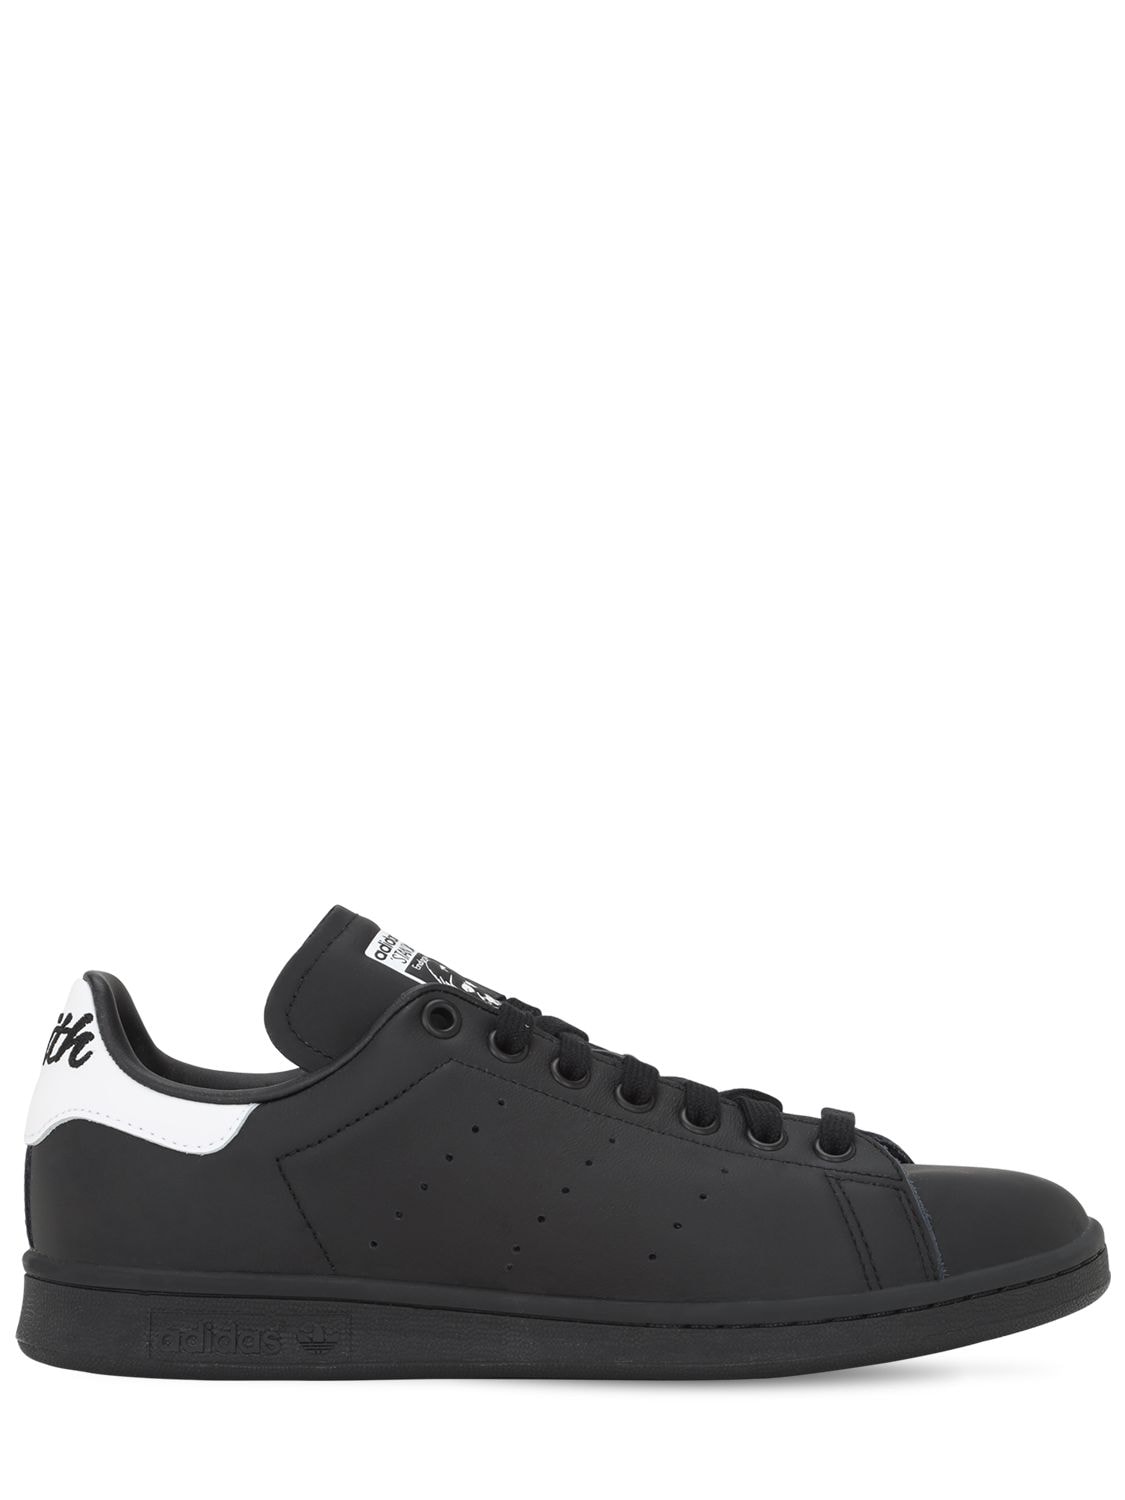 Adidas Originals Stan Smith Leather Sneakers In Black